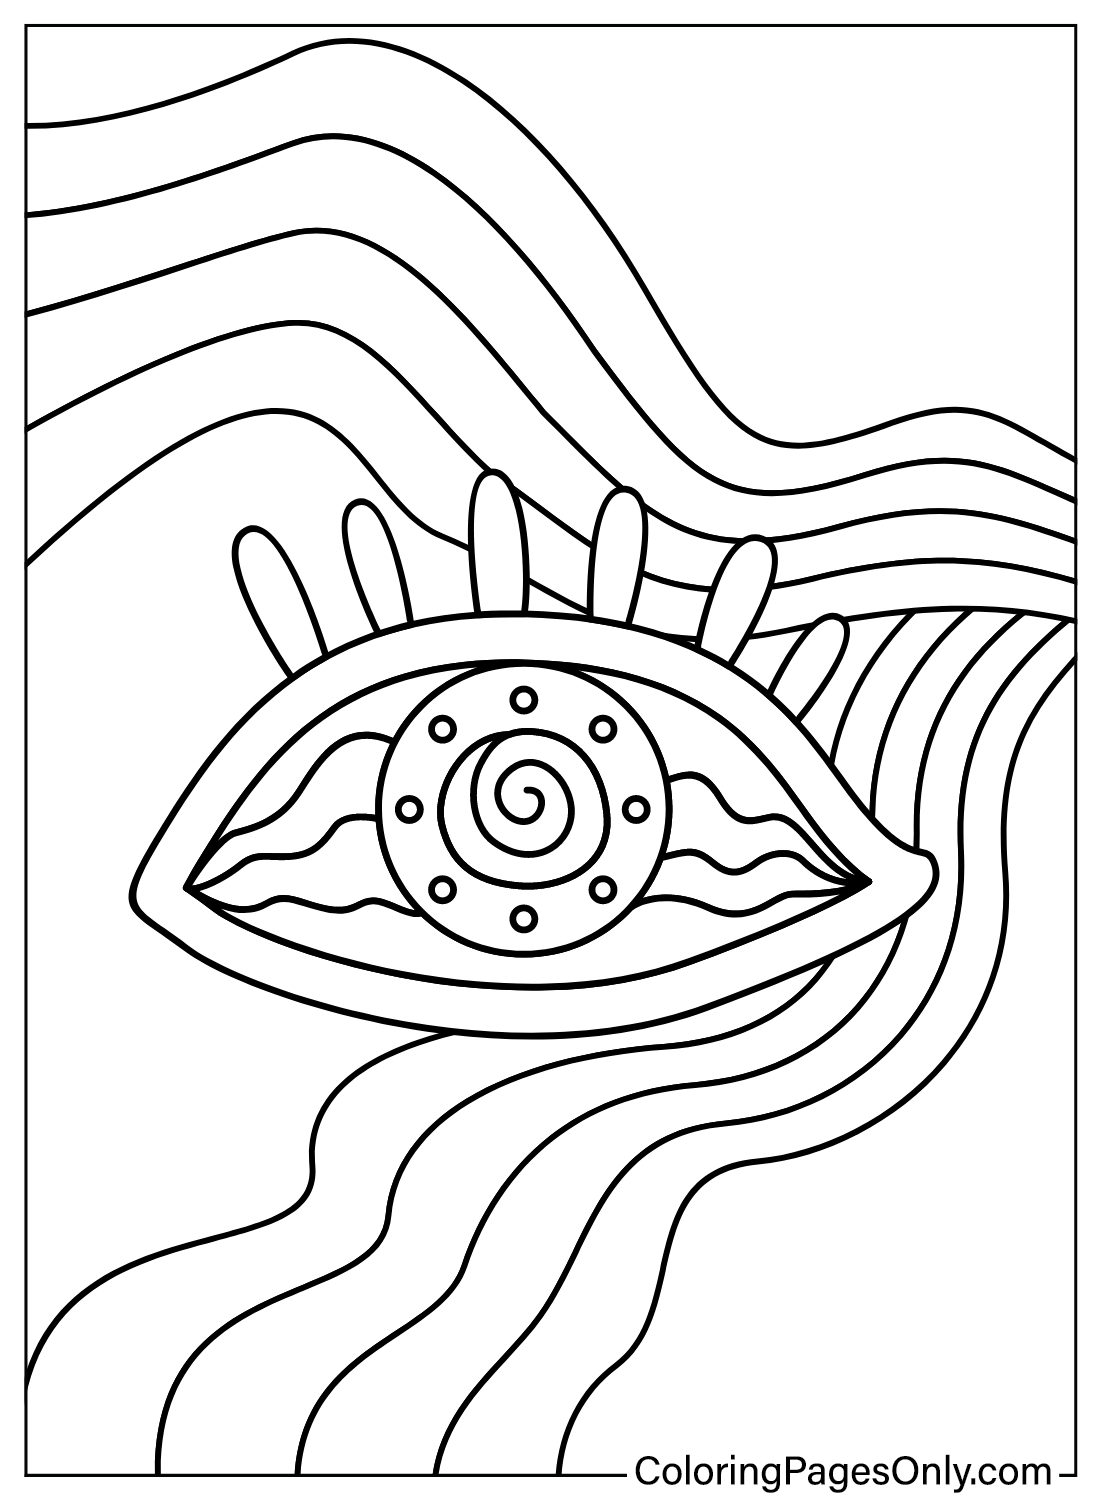 Printable Hippie Coloring Page from Hippie